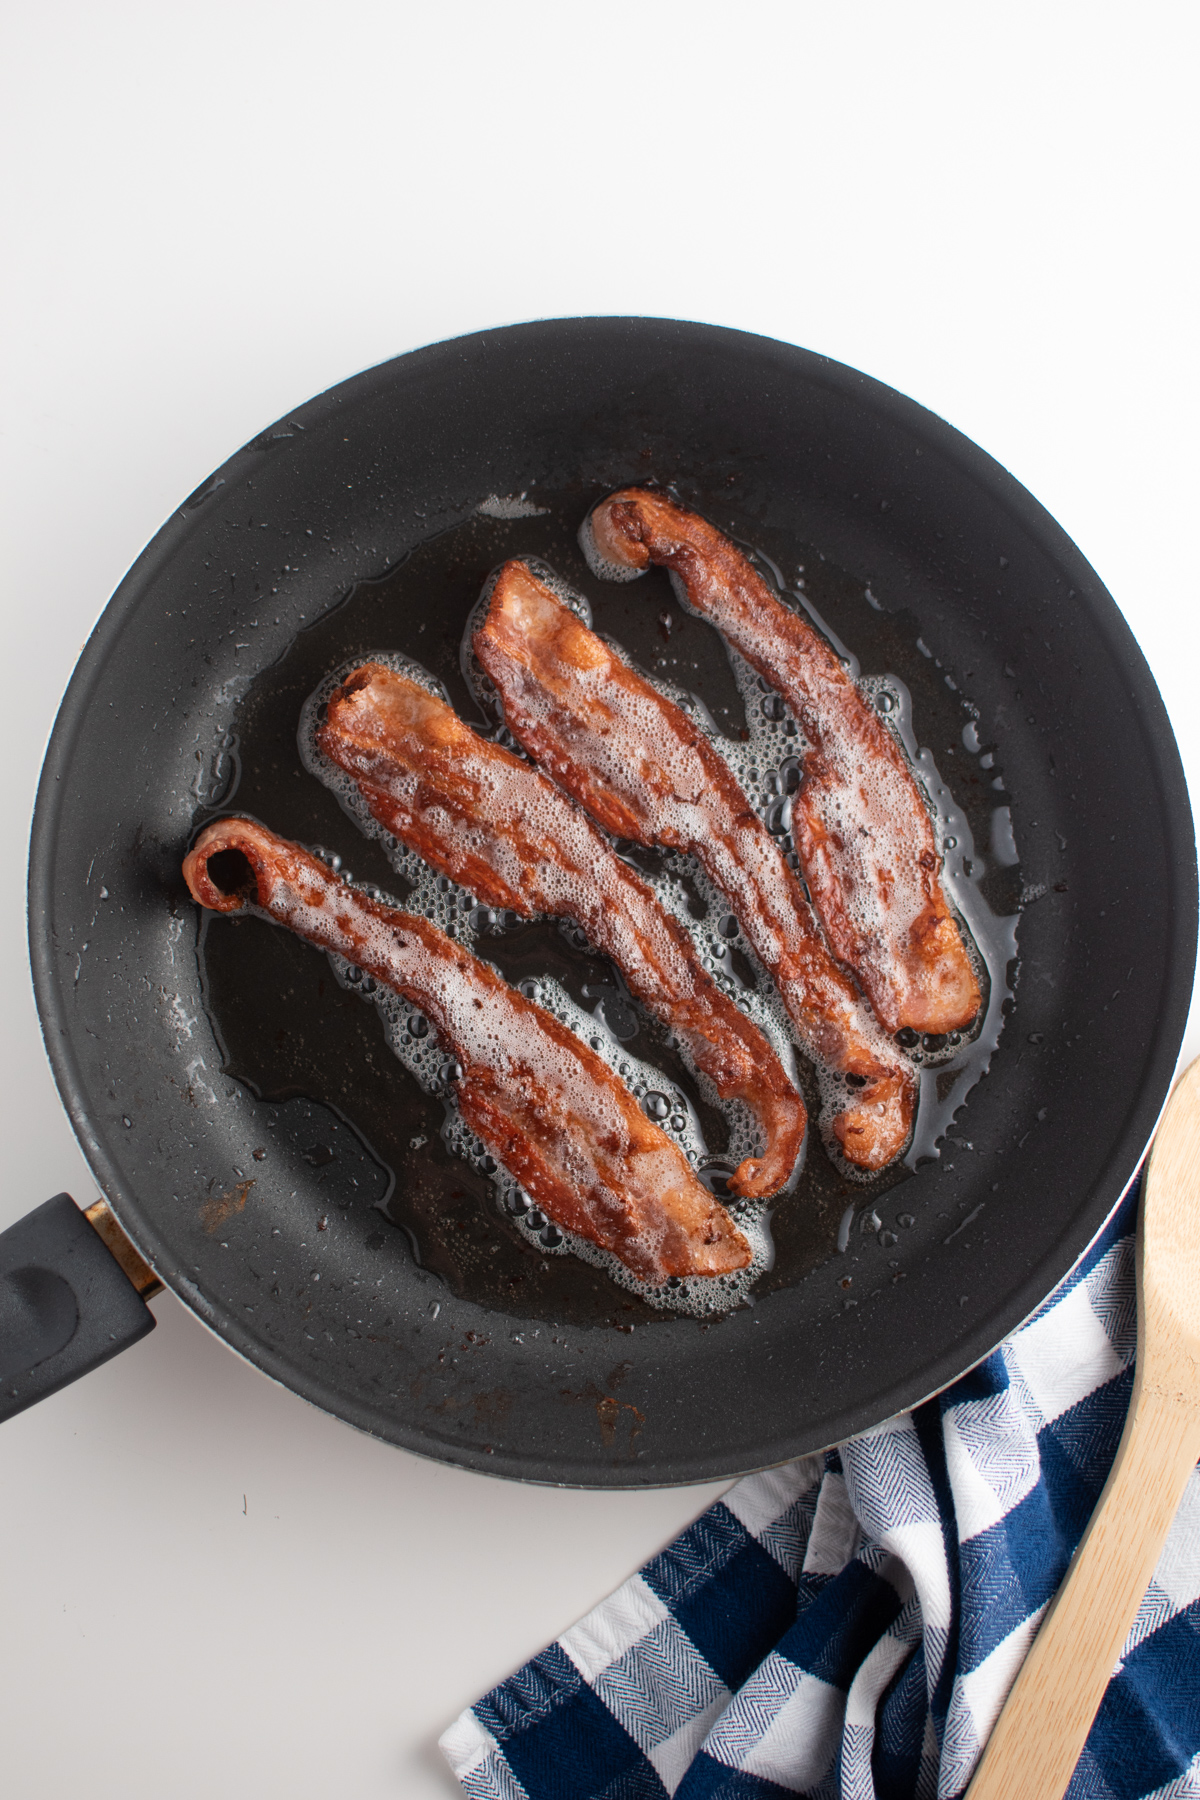 4 strips of cooked bacon in small black frying pan with bubbling grease.